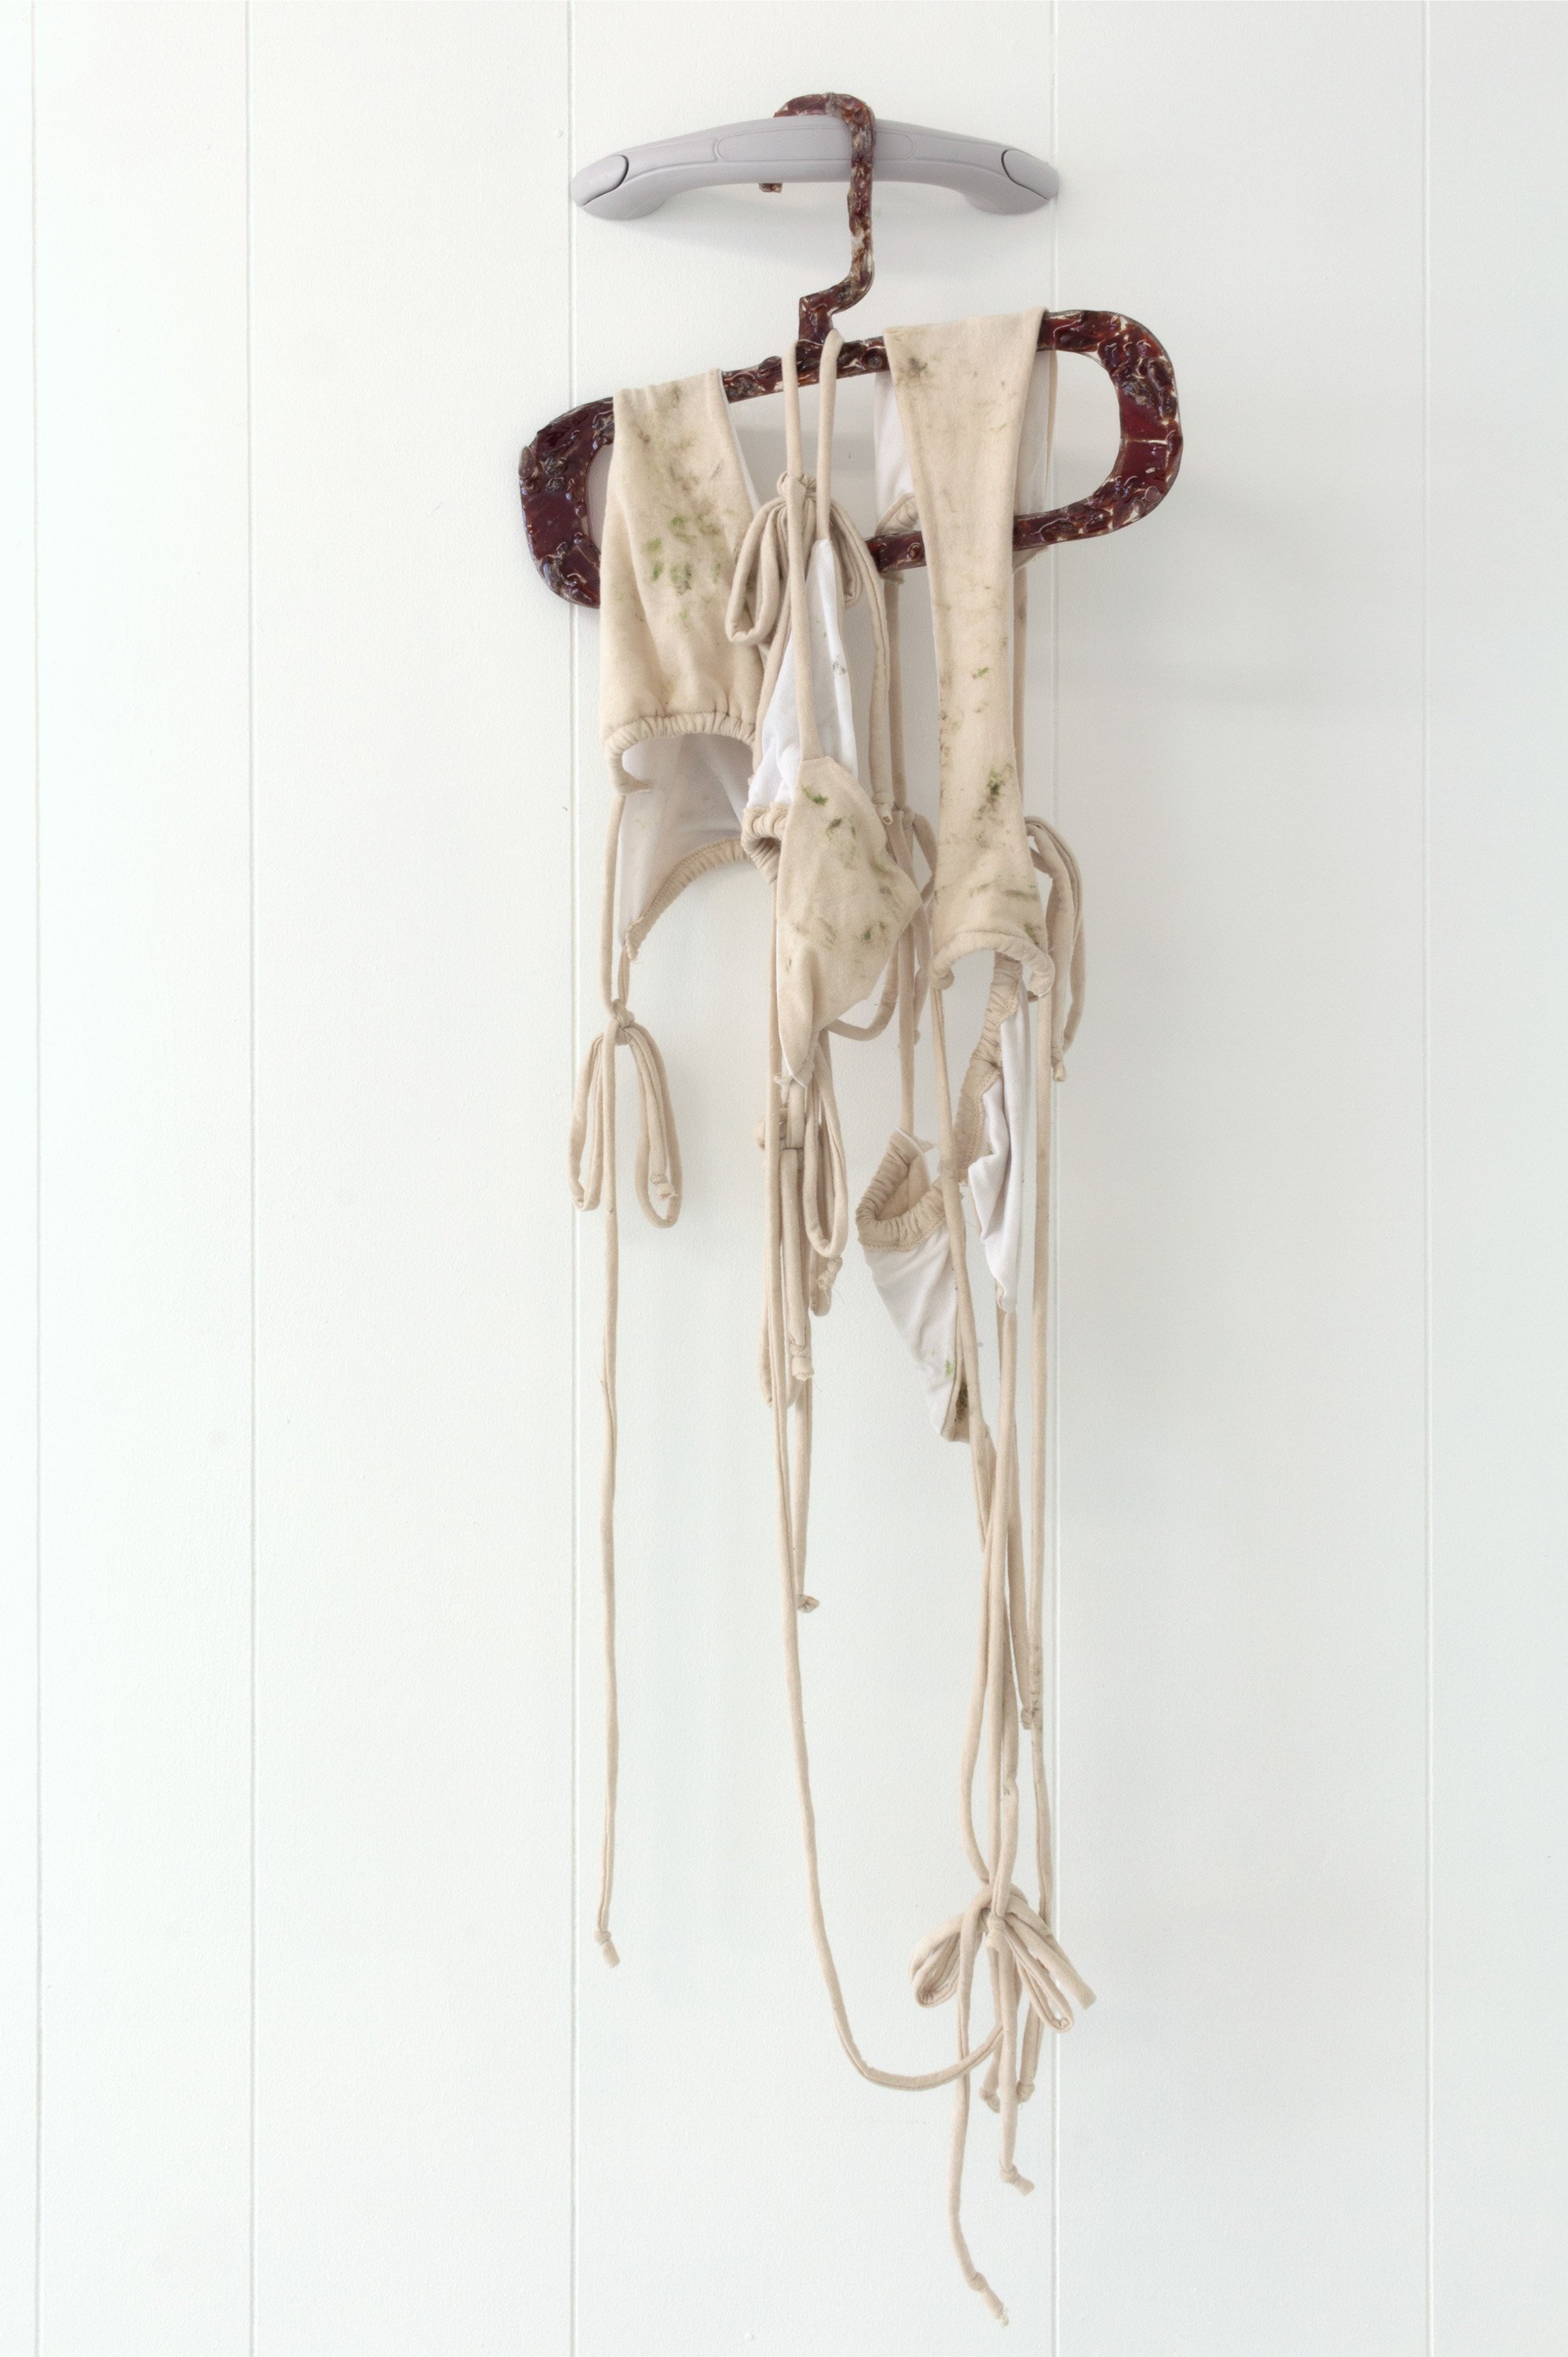  Maeve Coughlin  Untitled (airdry) , 2022 Vinyl car grab handle, Jack Links jerky, resin, cotton jersey, grass, dirt, and lake water Dimensions variable 